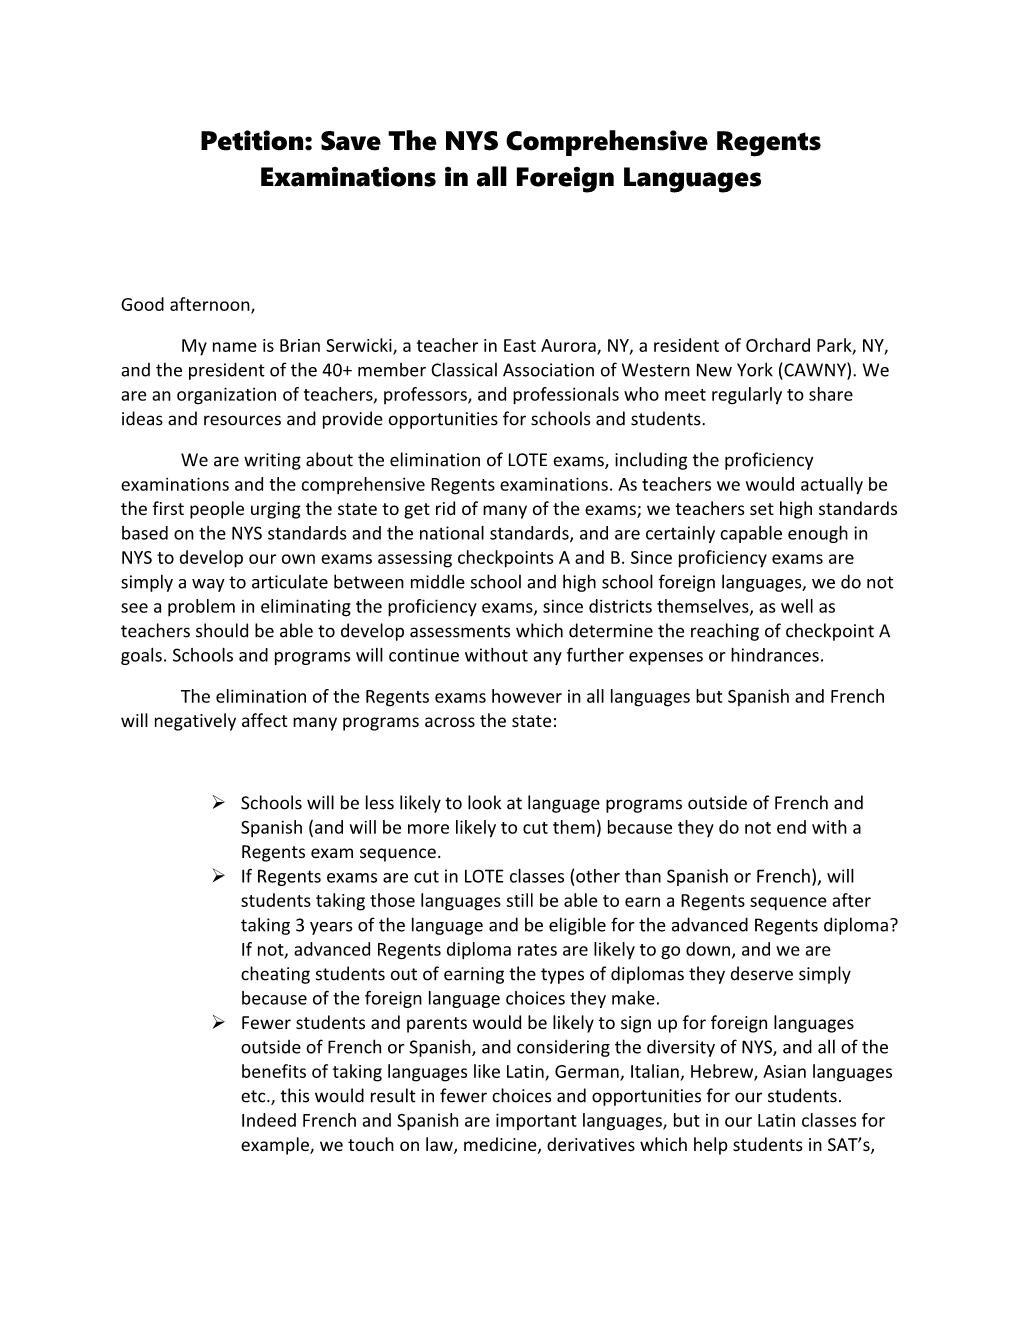 Petition: Save the NYS Comprehensive Regents Examinations in All Foreign Languages